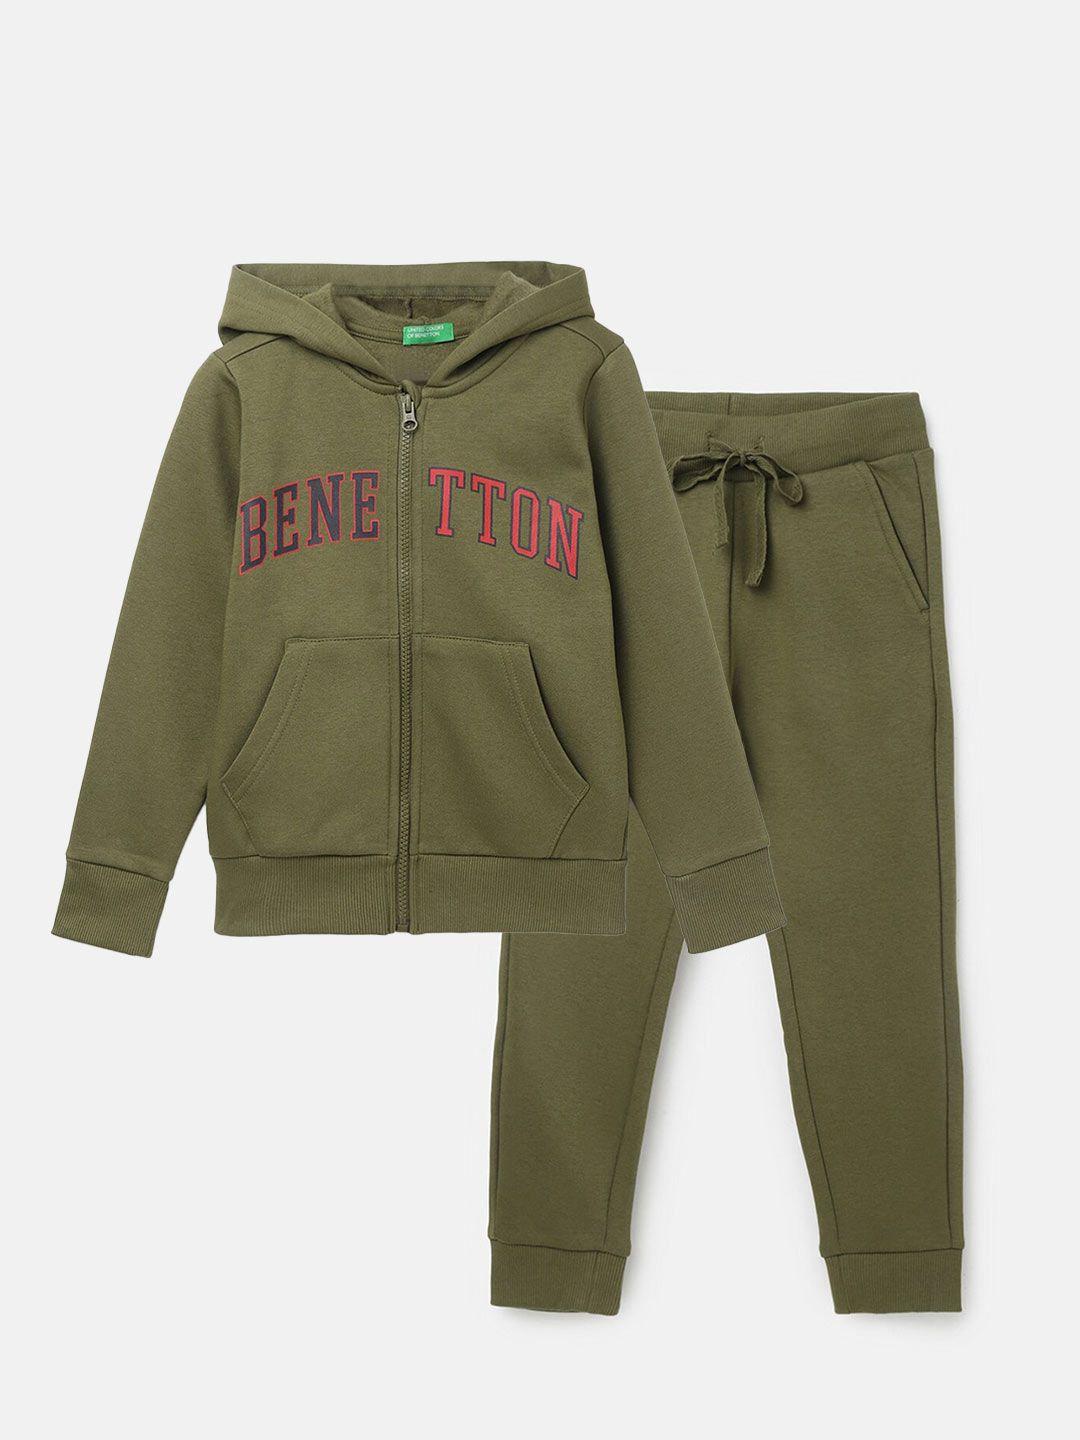 united colors of benetton boys typography printed hooded sweatshirt and joggers